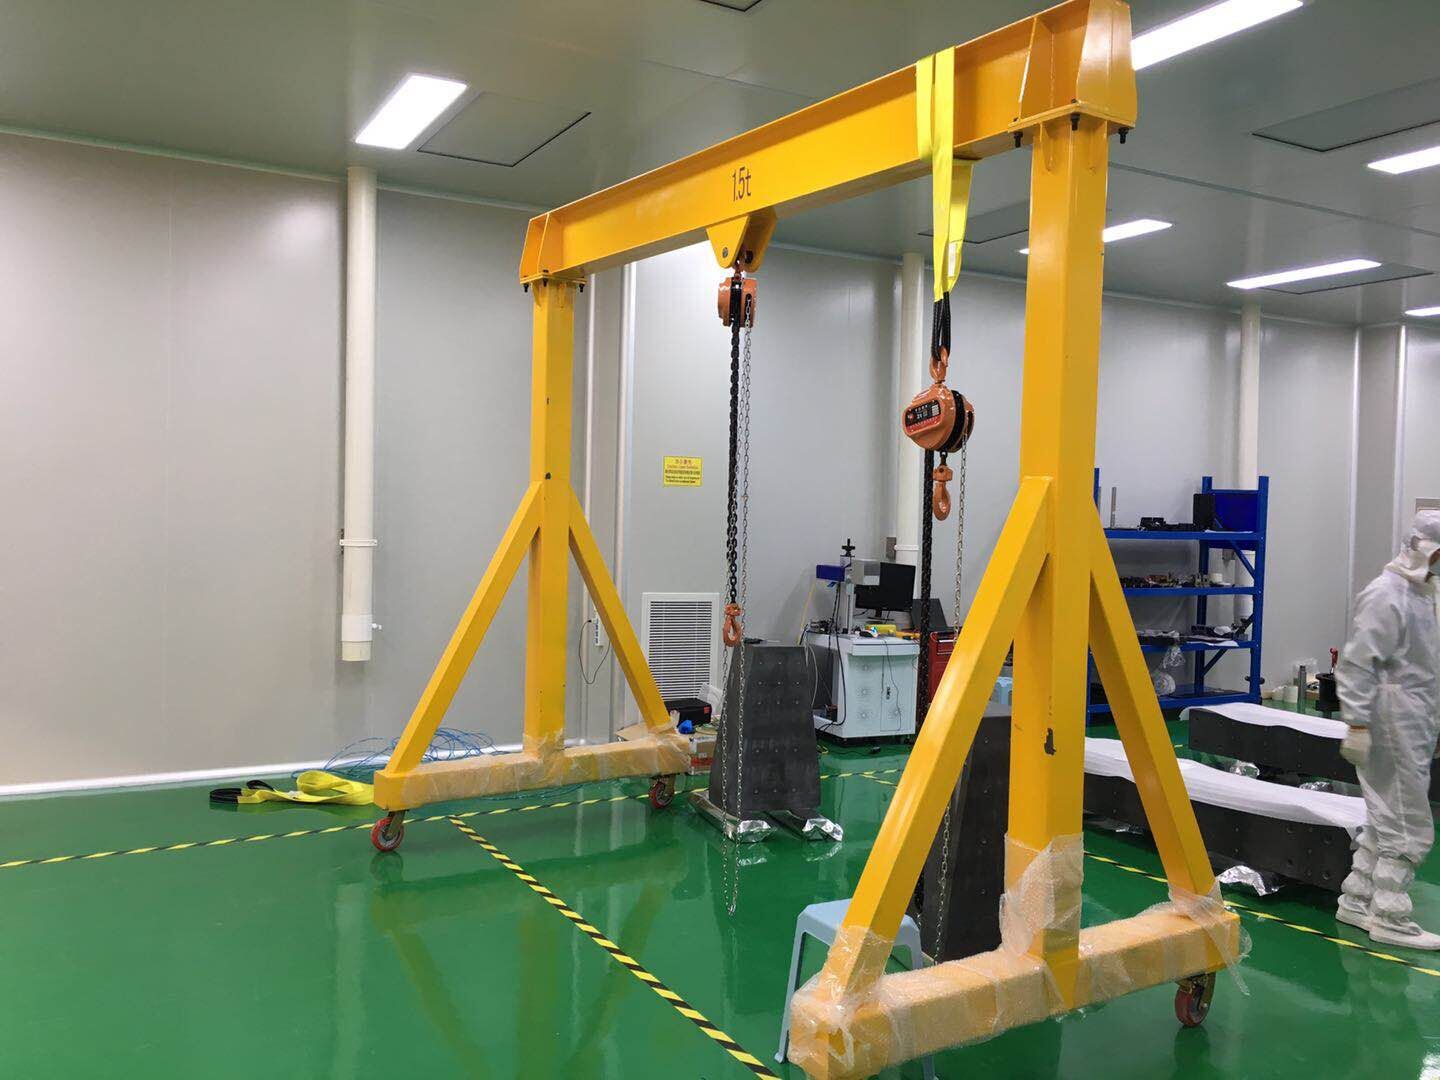 2Unit portable gantry crane shipping to Indonesia丨Latest cooperation